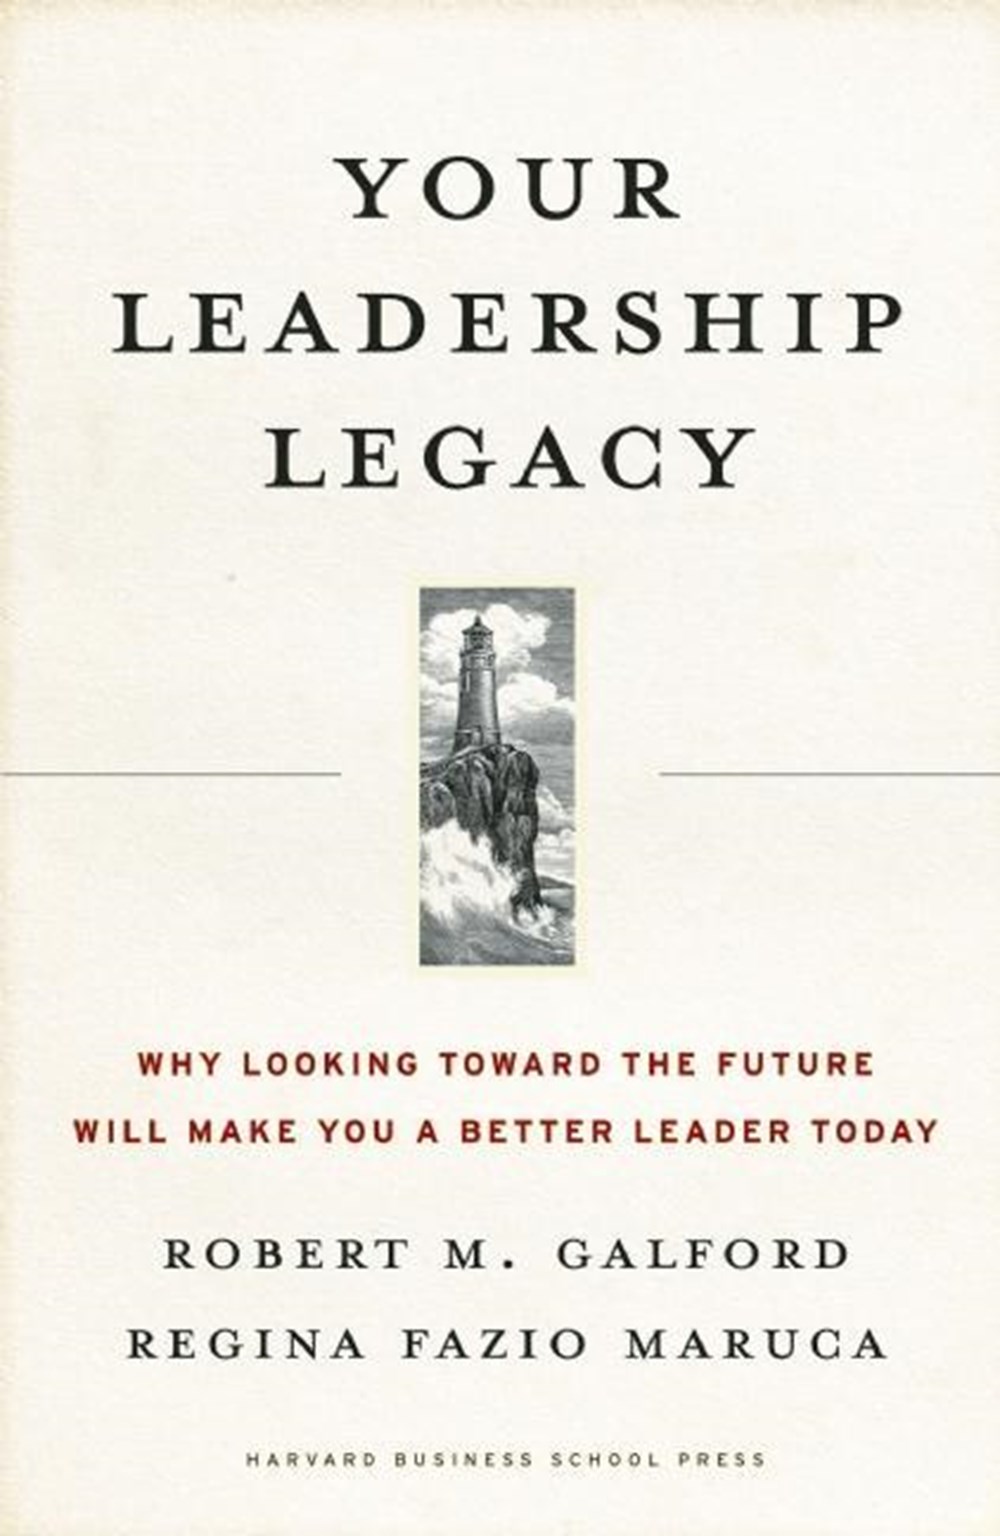 Your Leadership Legacy Why Looking Toward the Future Will Make You a Better Leader Today